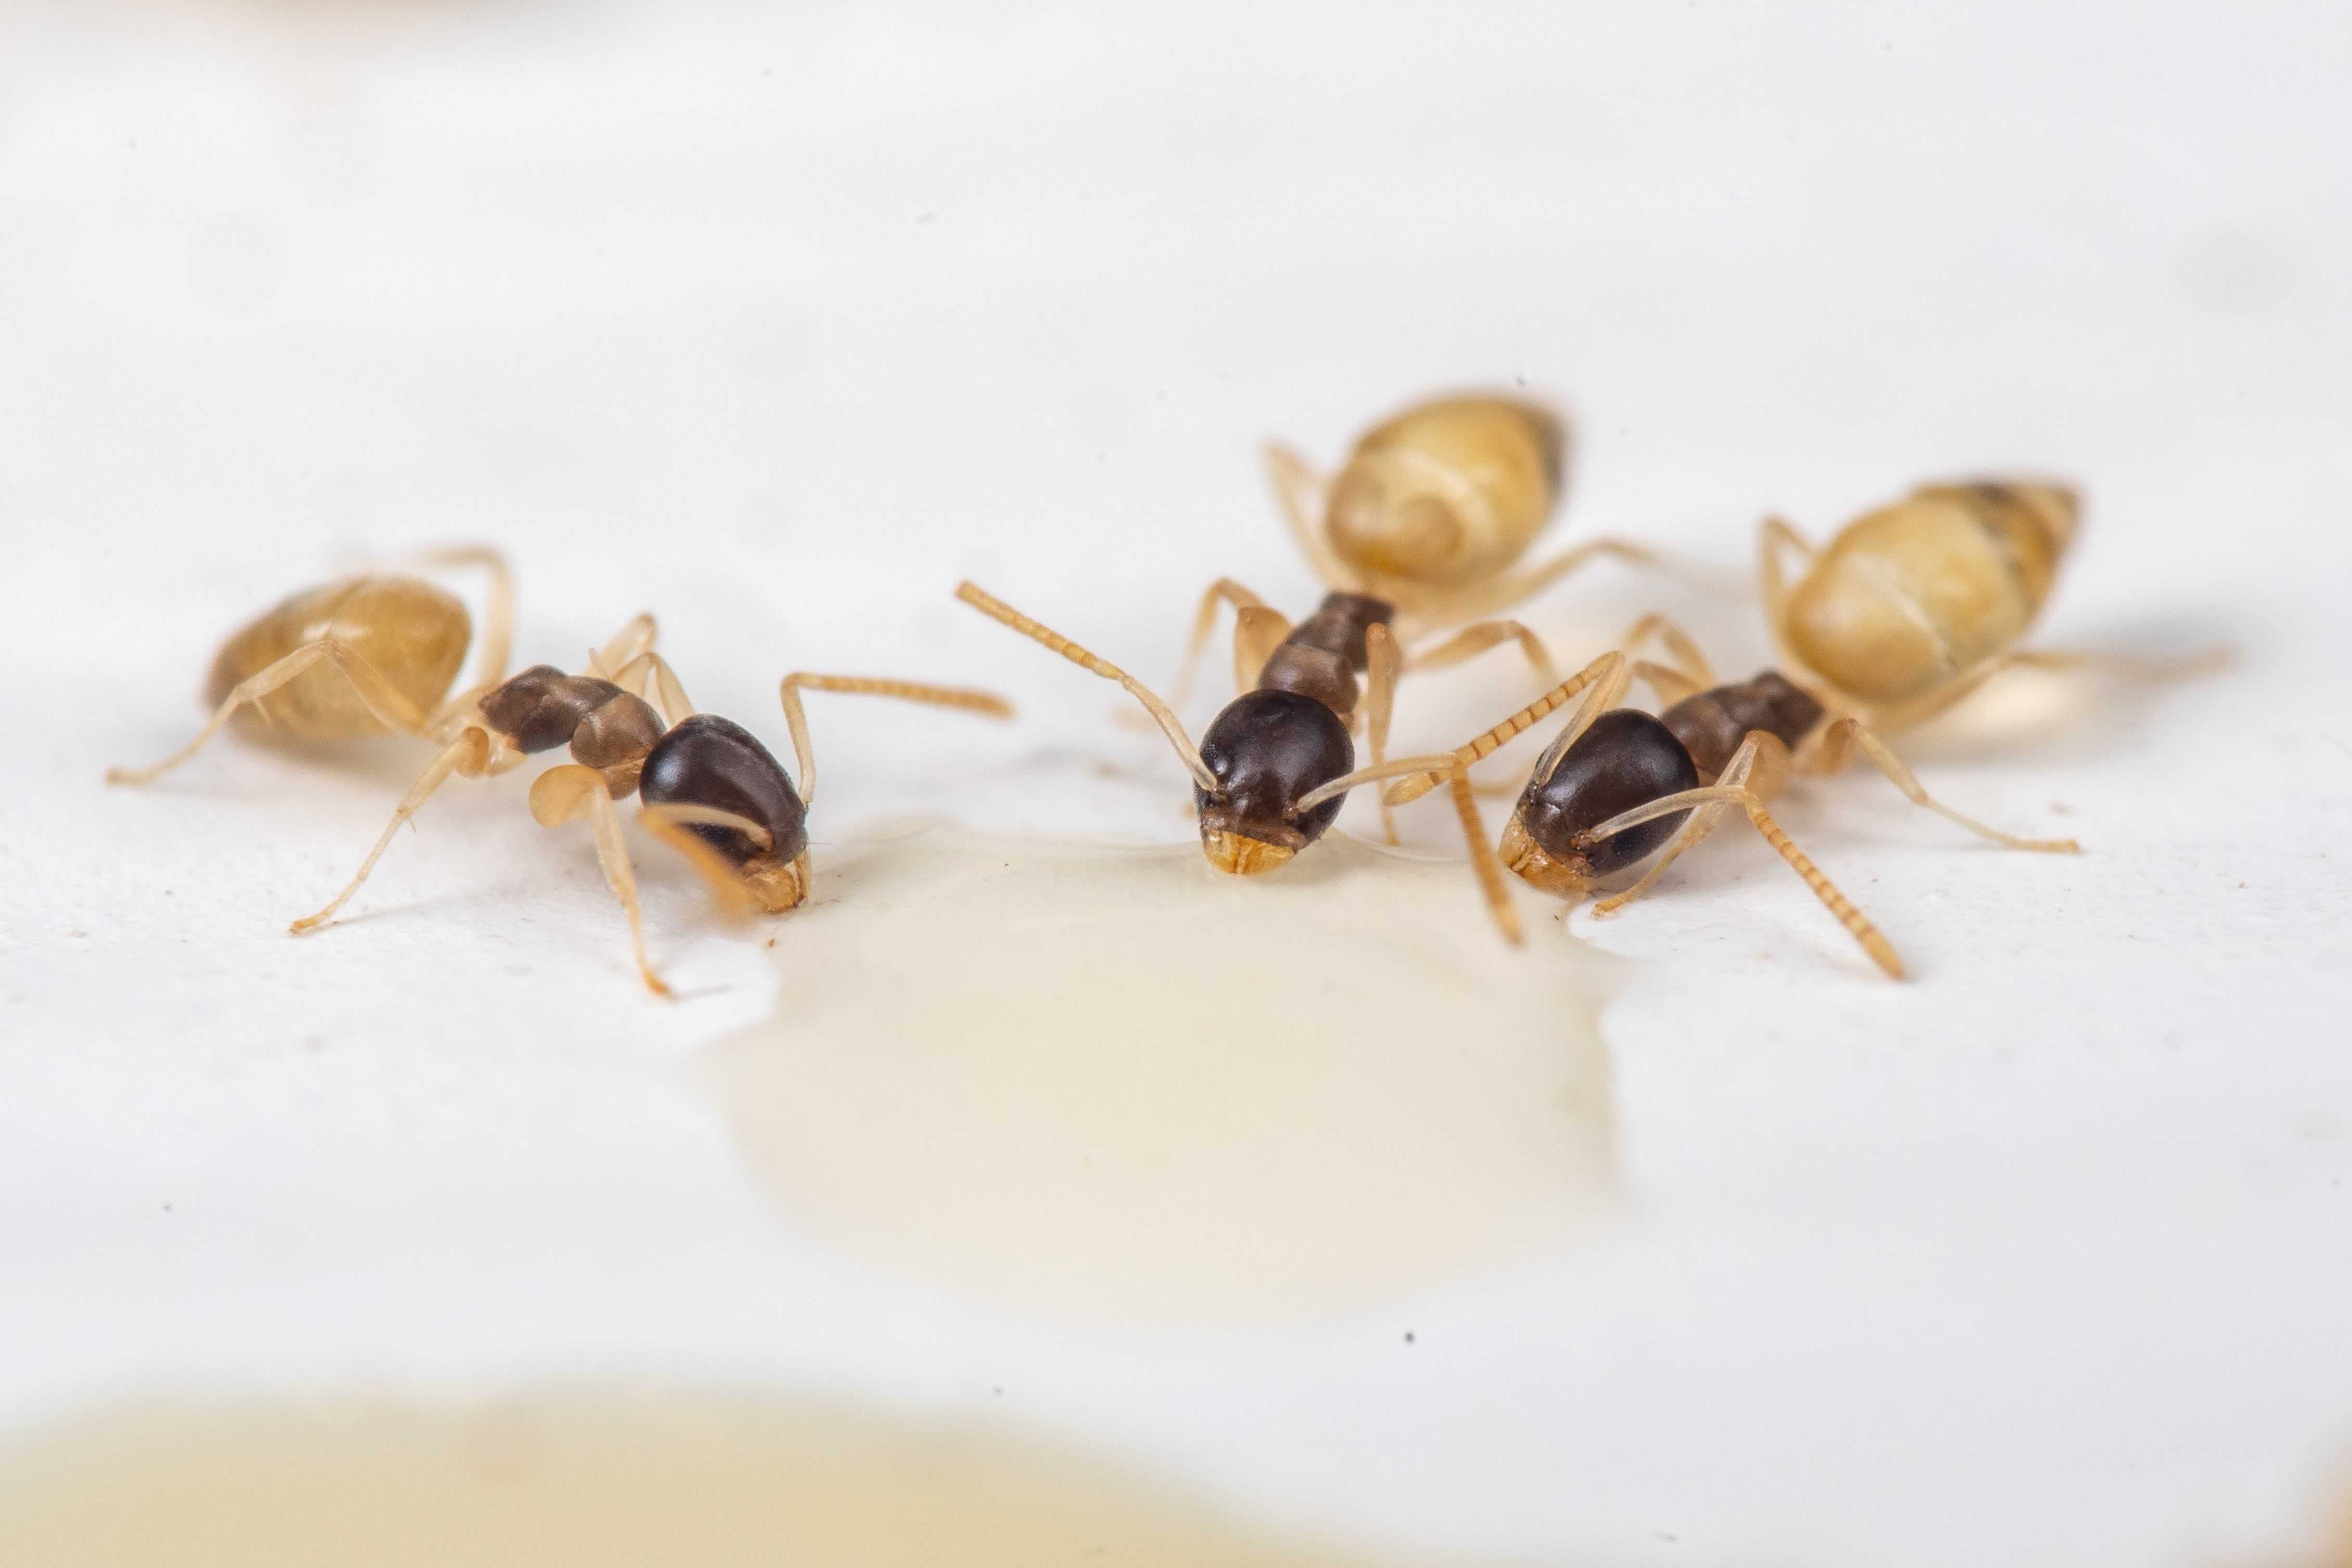 Ghost ant control in Fort Lauderdale